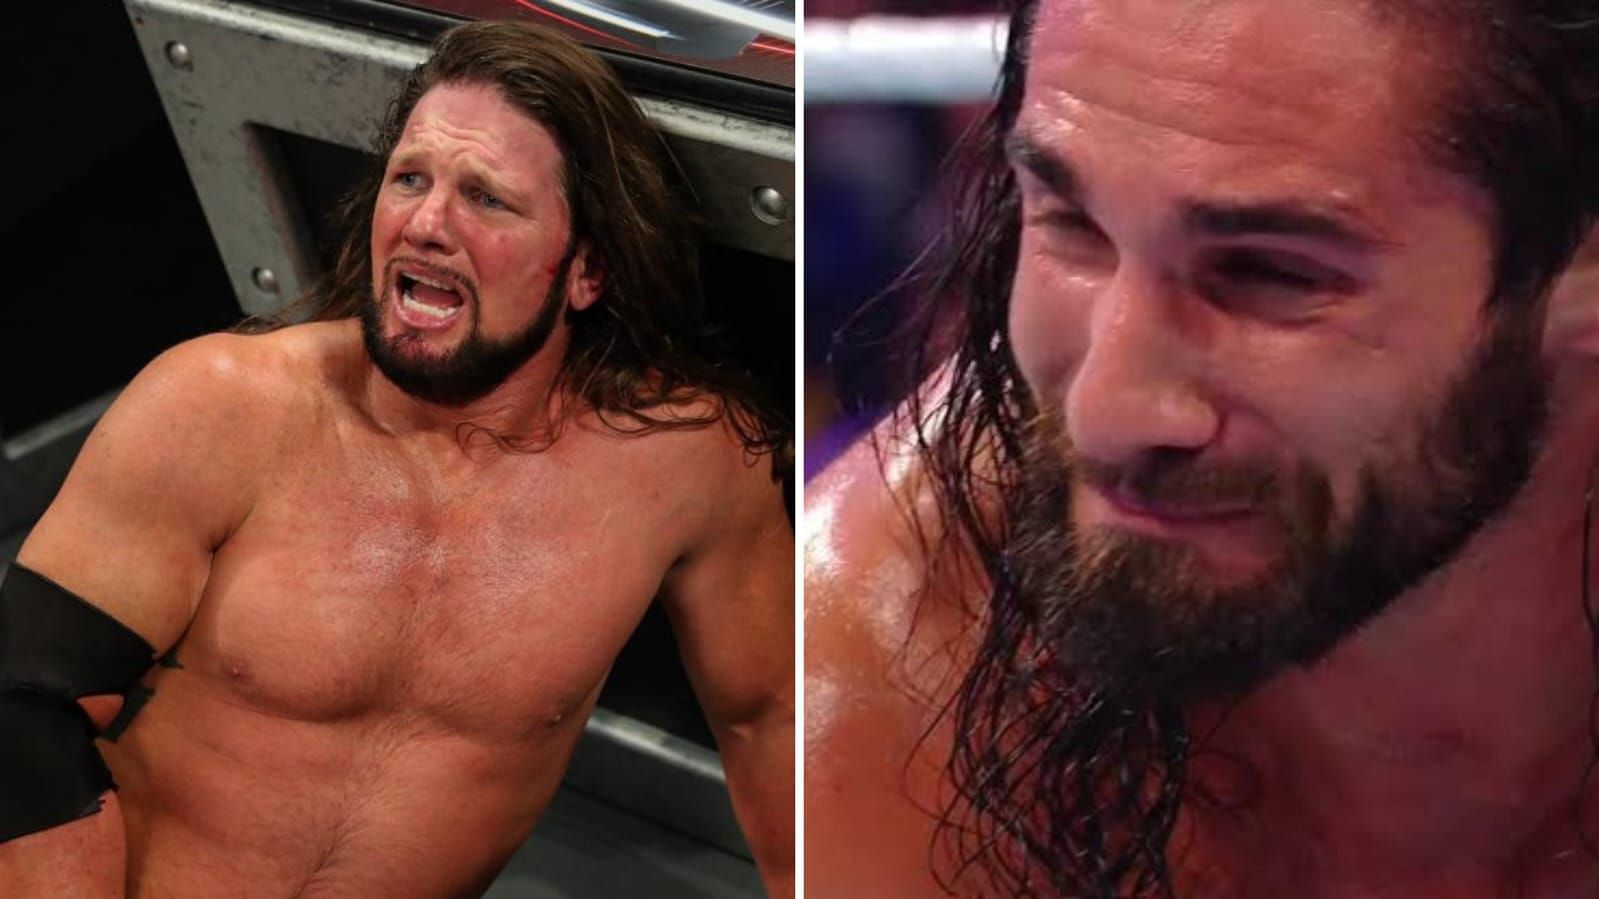 AJ Styles and Seth Rollins could steal the show at Night of Champions.